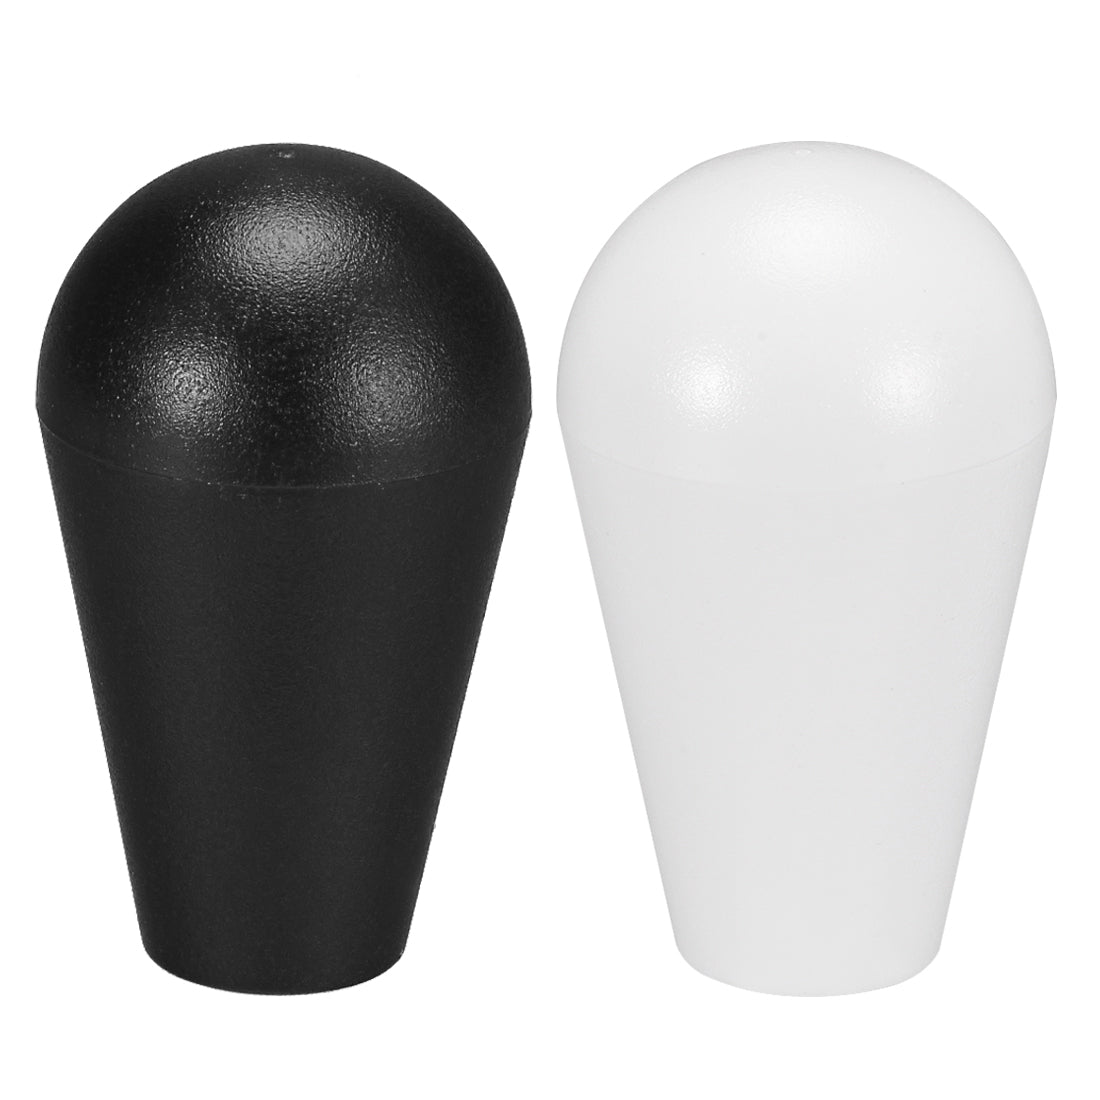 uxcell Uxcell Ellipse Oval Joystick Head Rocker Ball Top Handle American Type Arcade Game DIY Parts Replacement White Black 2Pcs